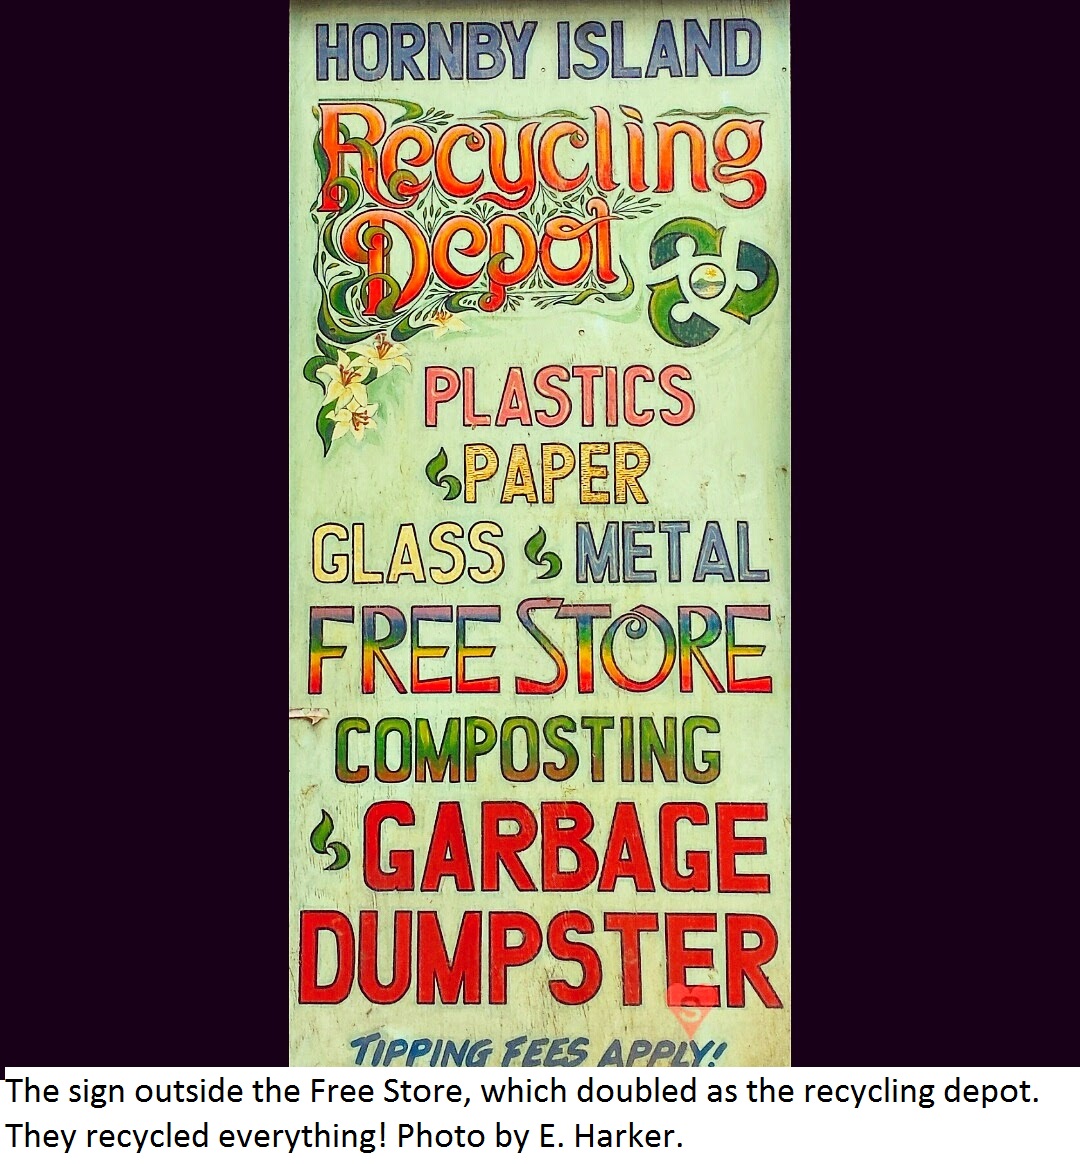 sign outside free store reading 'Hornby Island recycling depot'